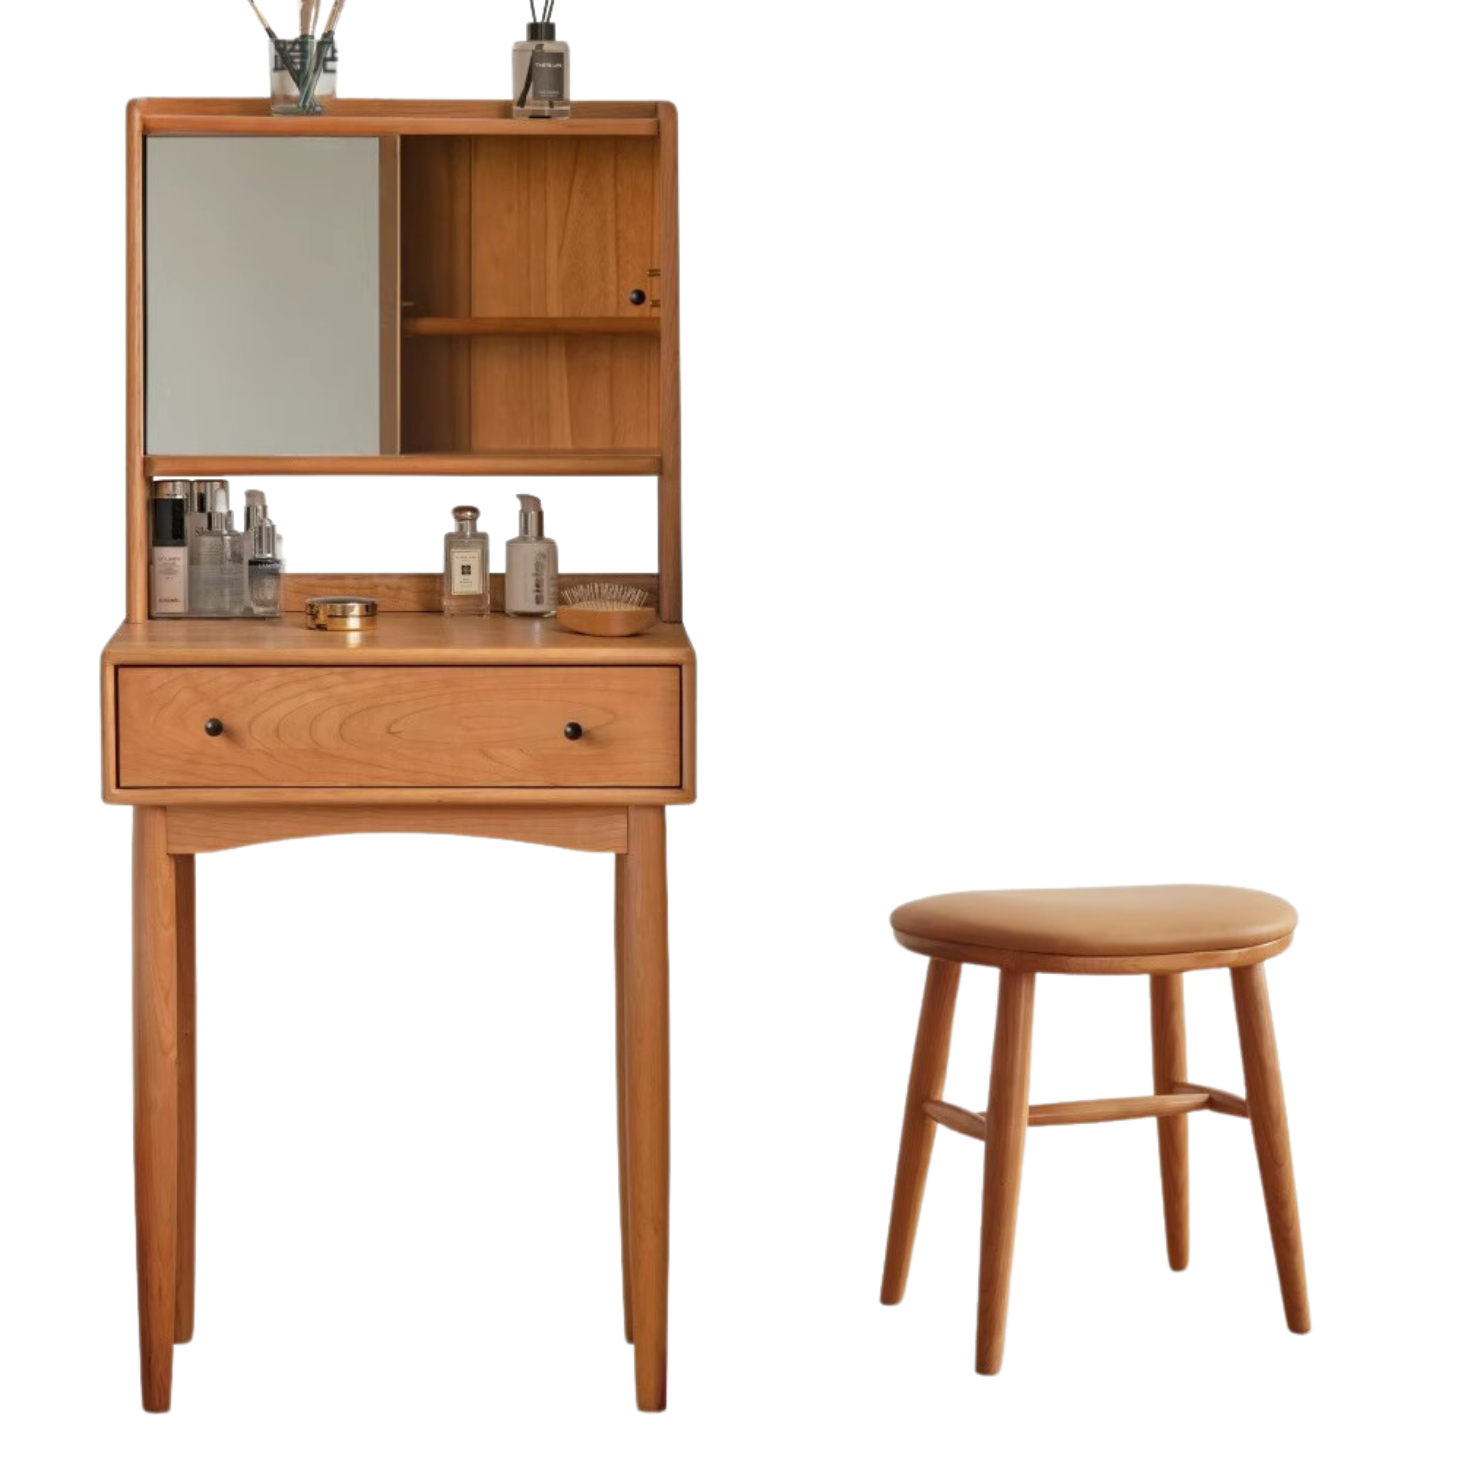 Cherry wood multi-functional storage dressing table: